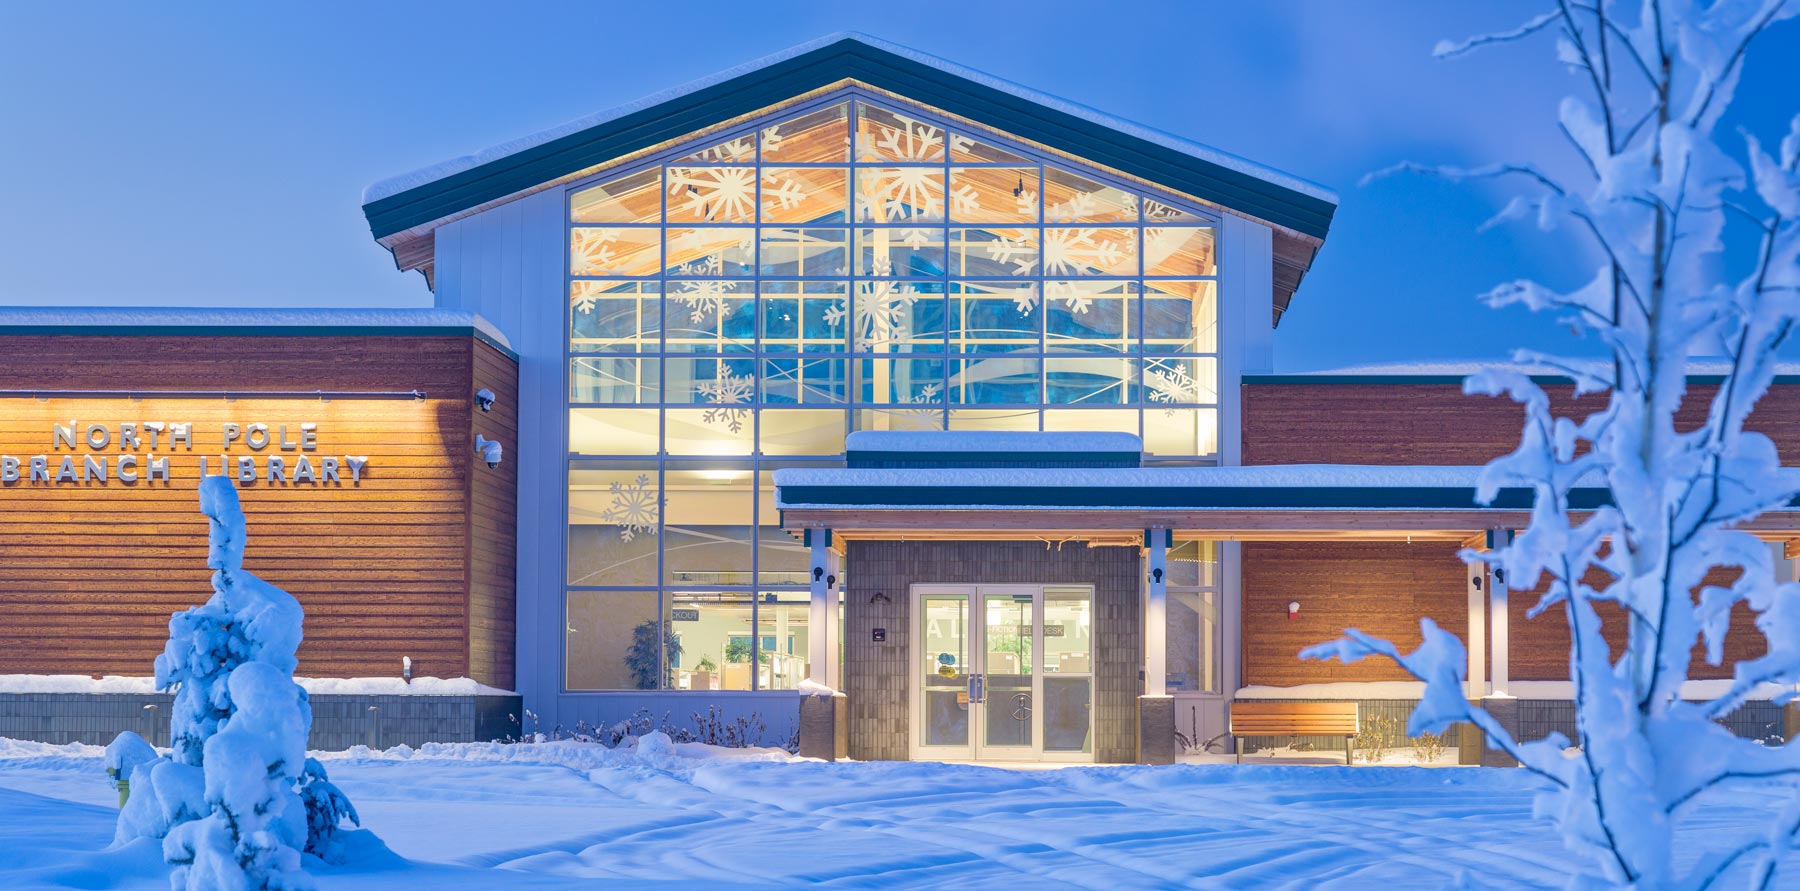 North Pole Branch Library